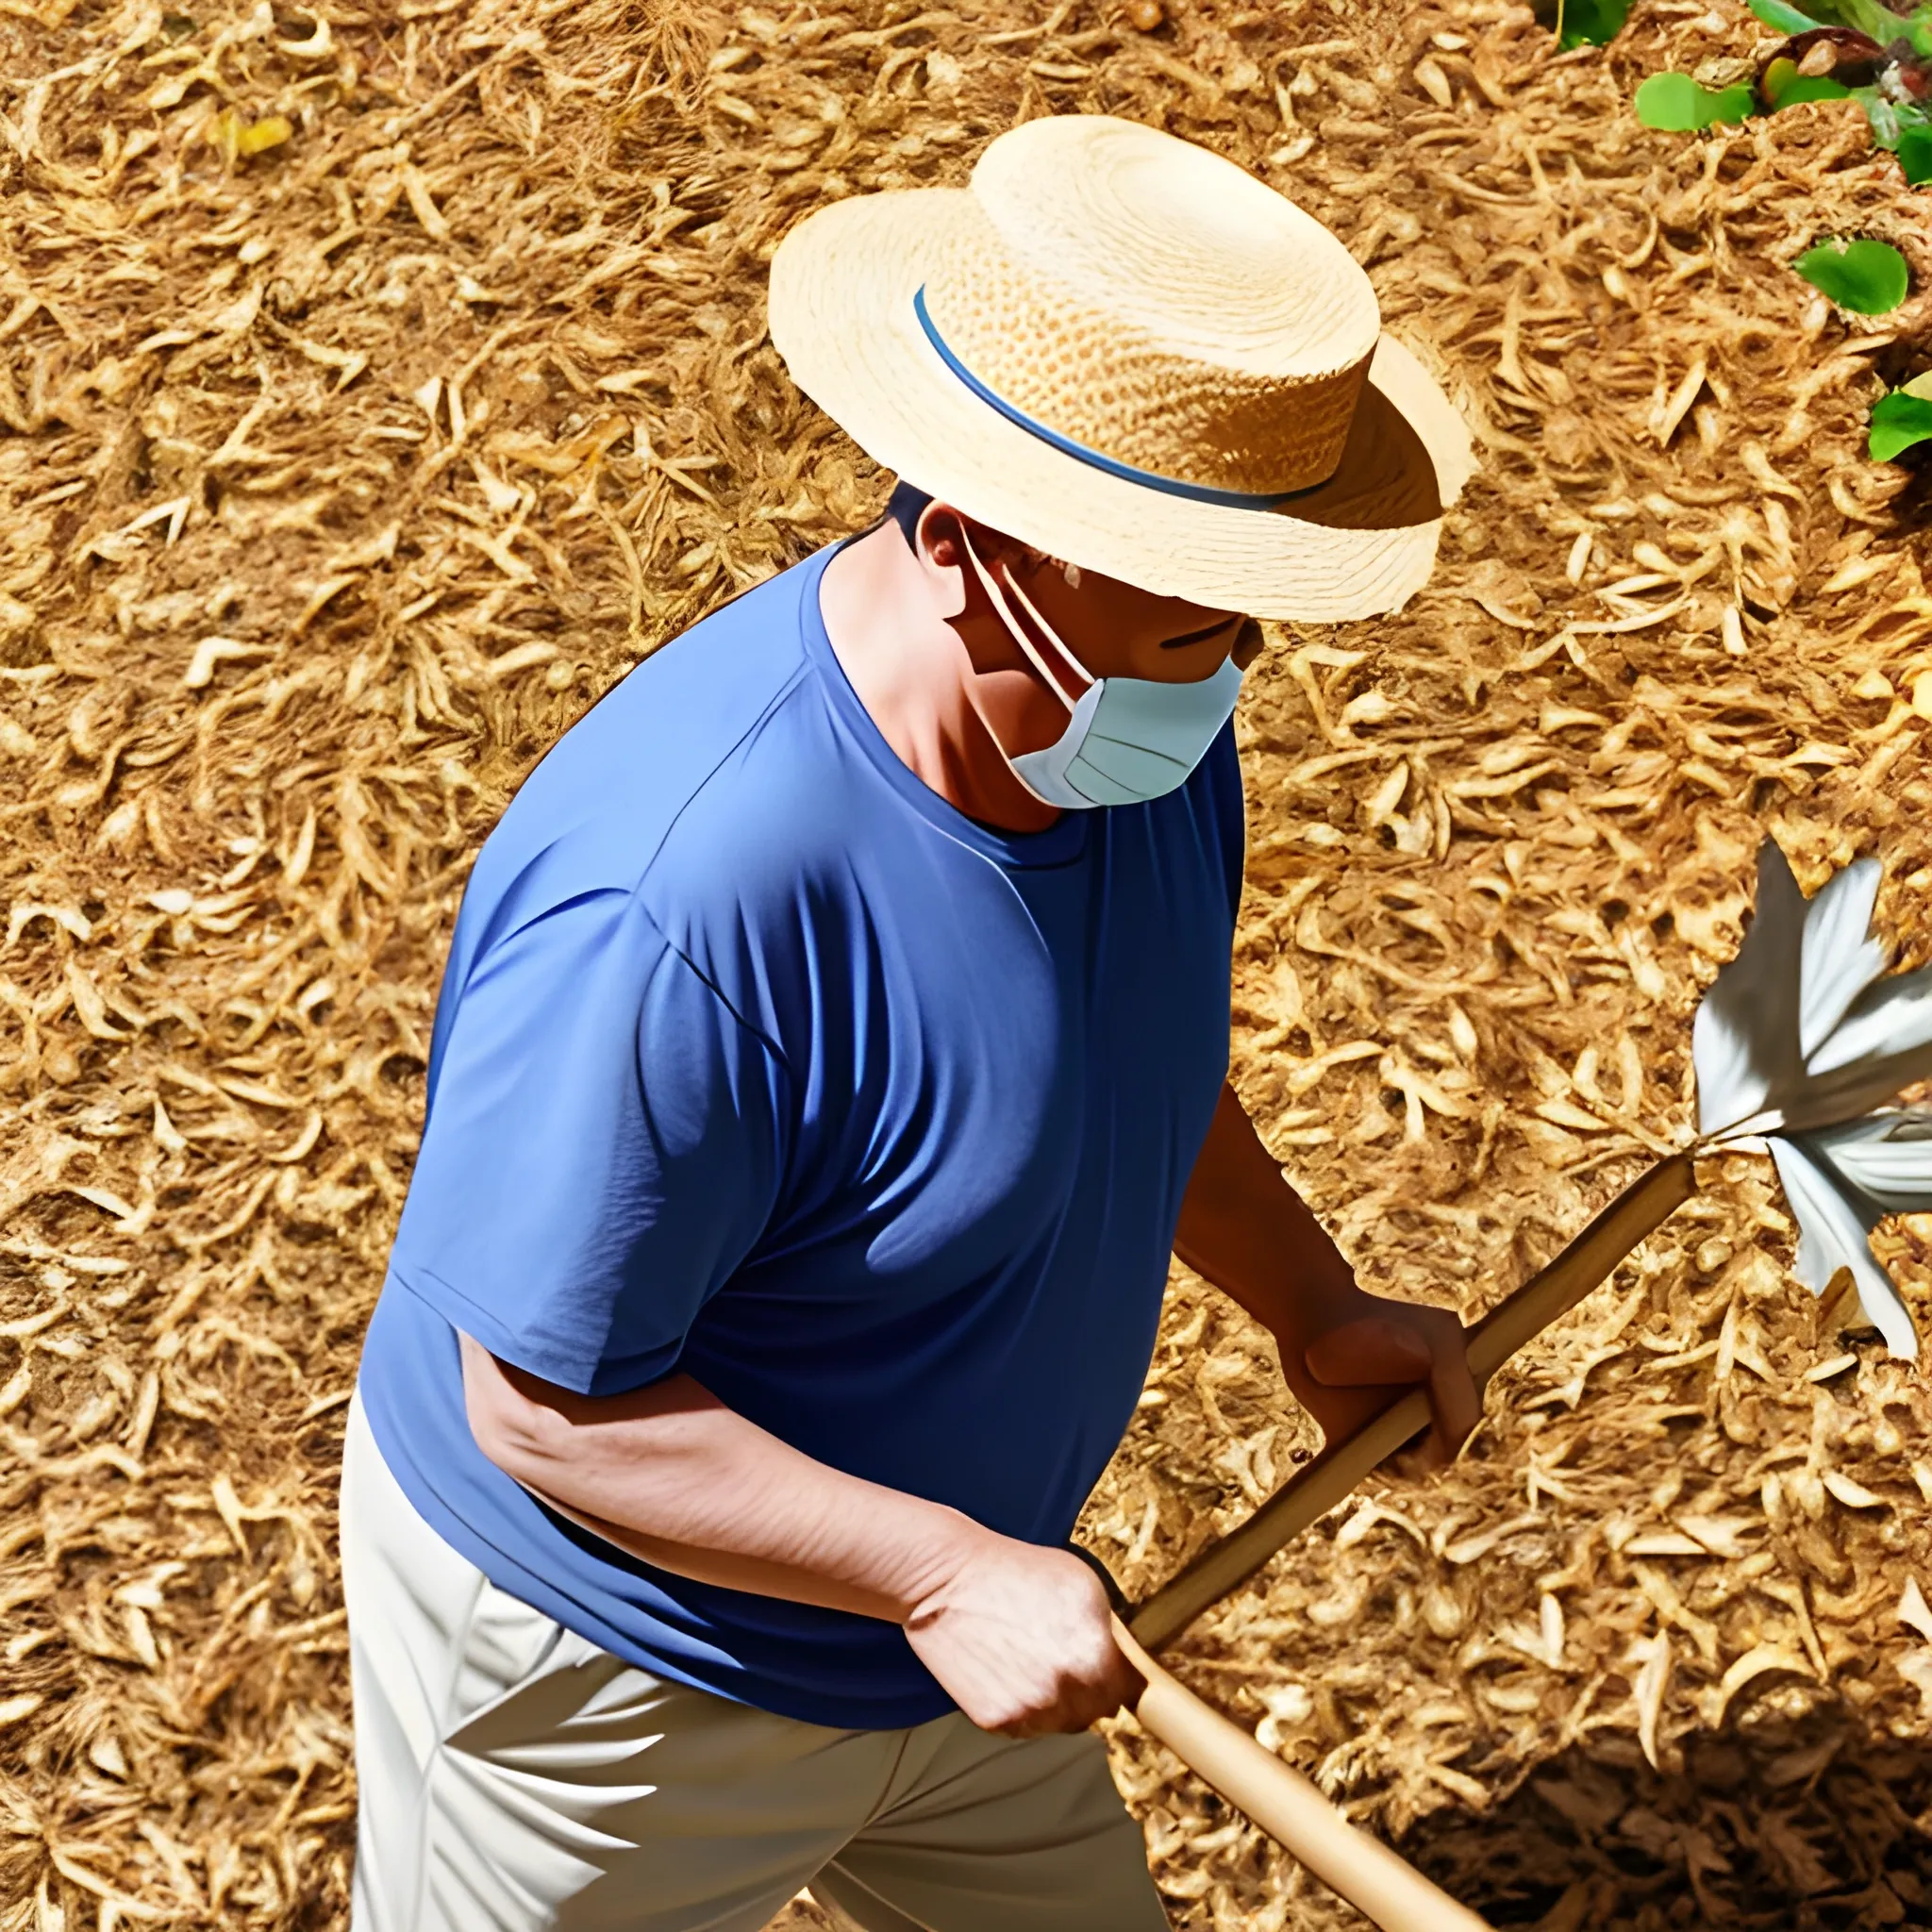 skinny-fat man in his 40s raking leaves while wearing a facemask and a straw hat. 